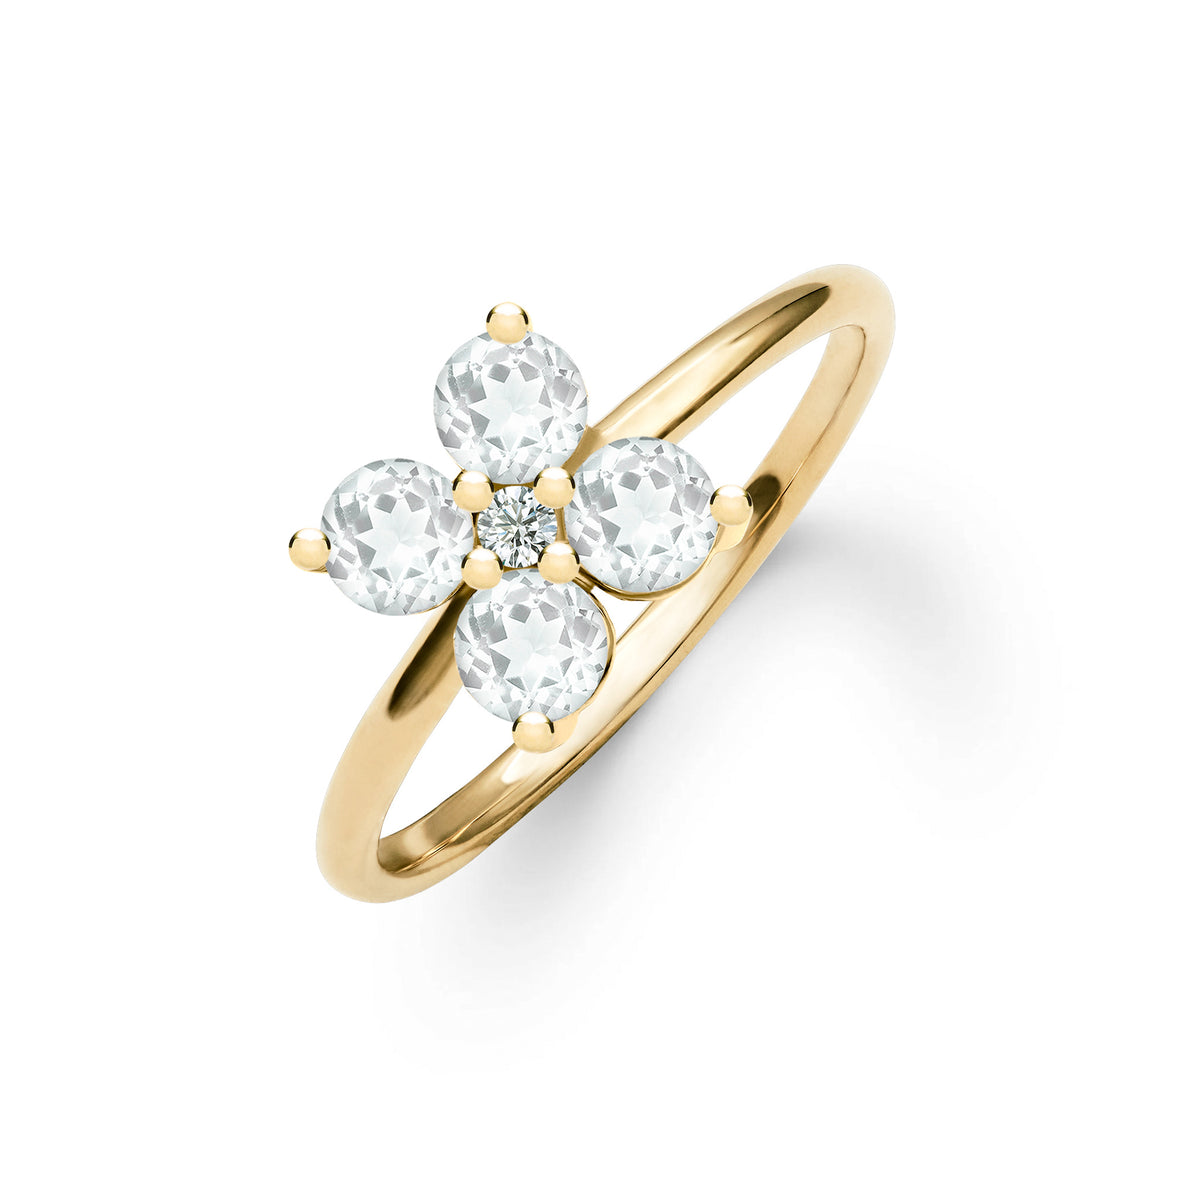 Mrs Ring | Top engagement rings, Gold initial ring, Gold jewellery design  necklaces